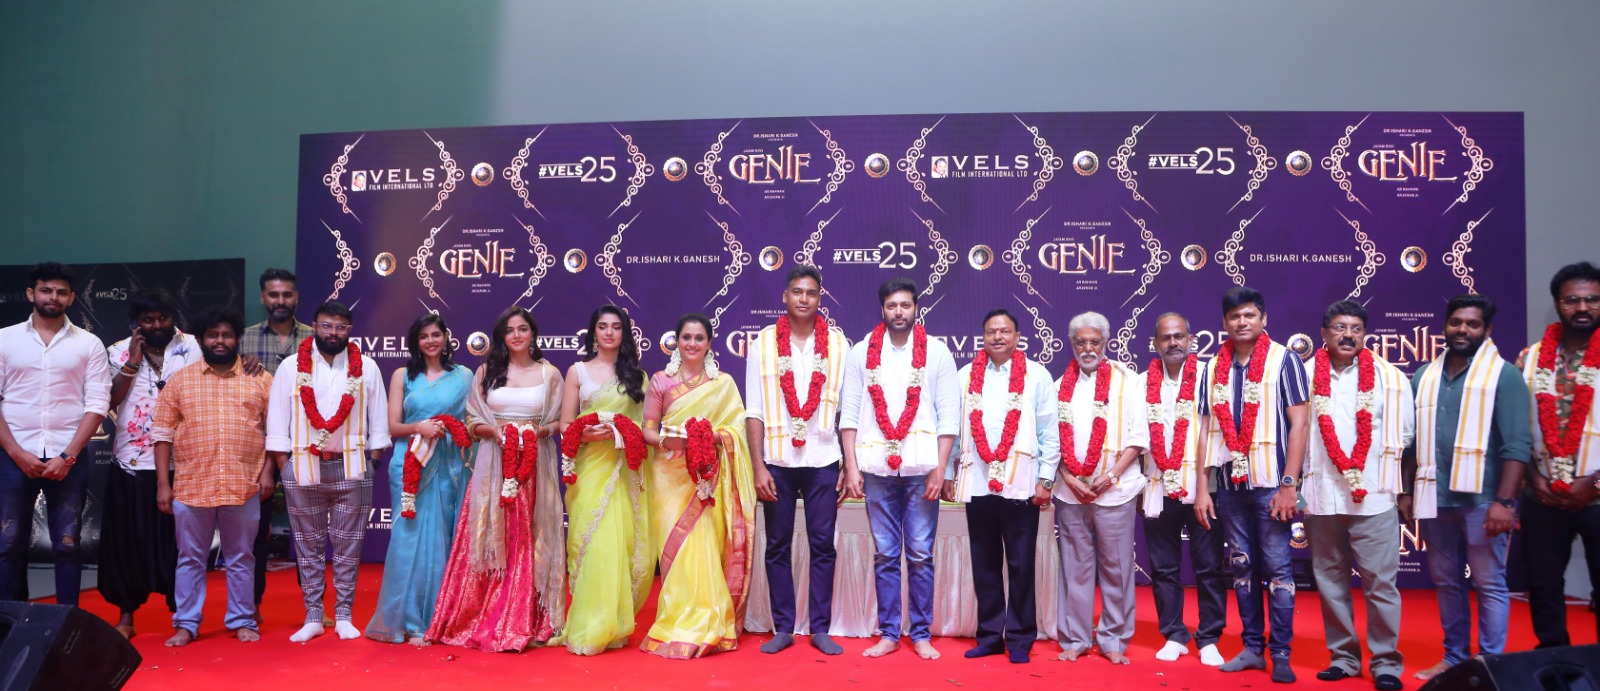 Vels Film International’s 25th Production Venture starts with pooja ceremony